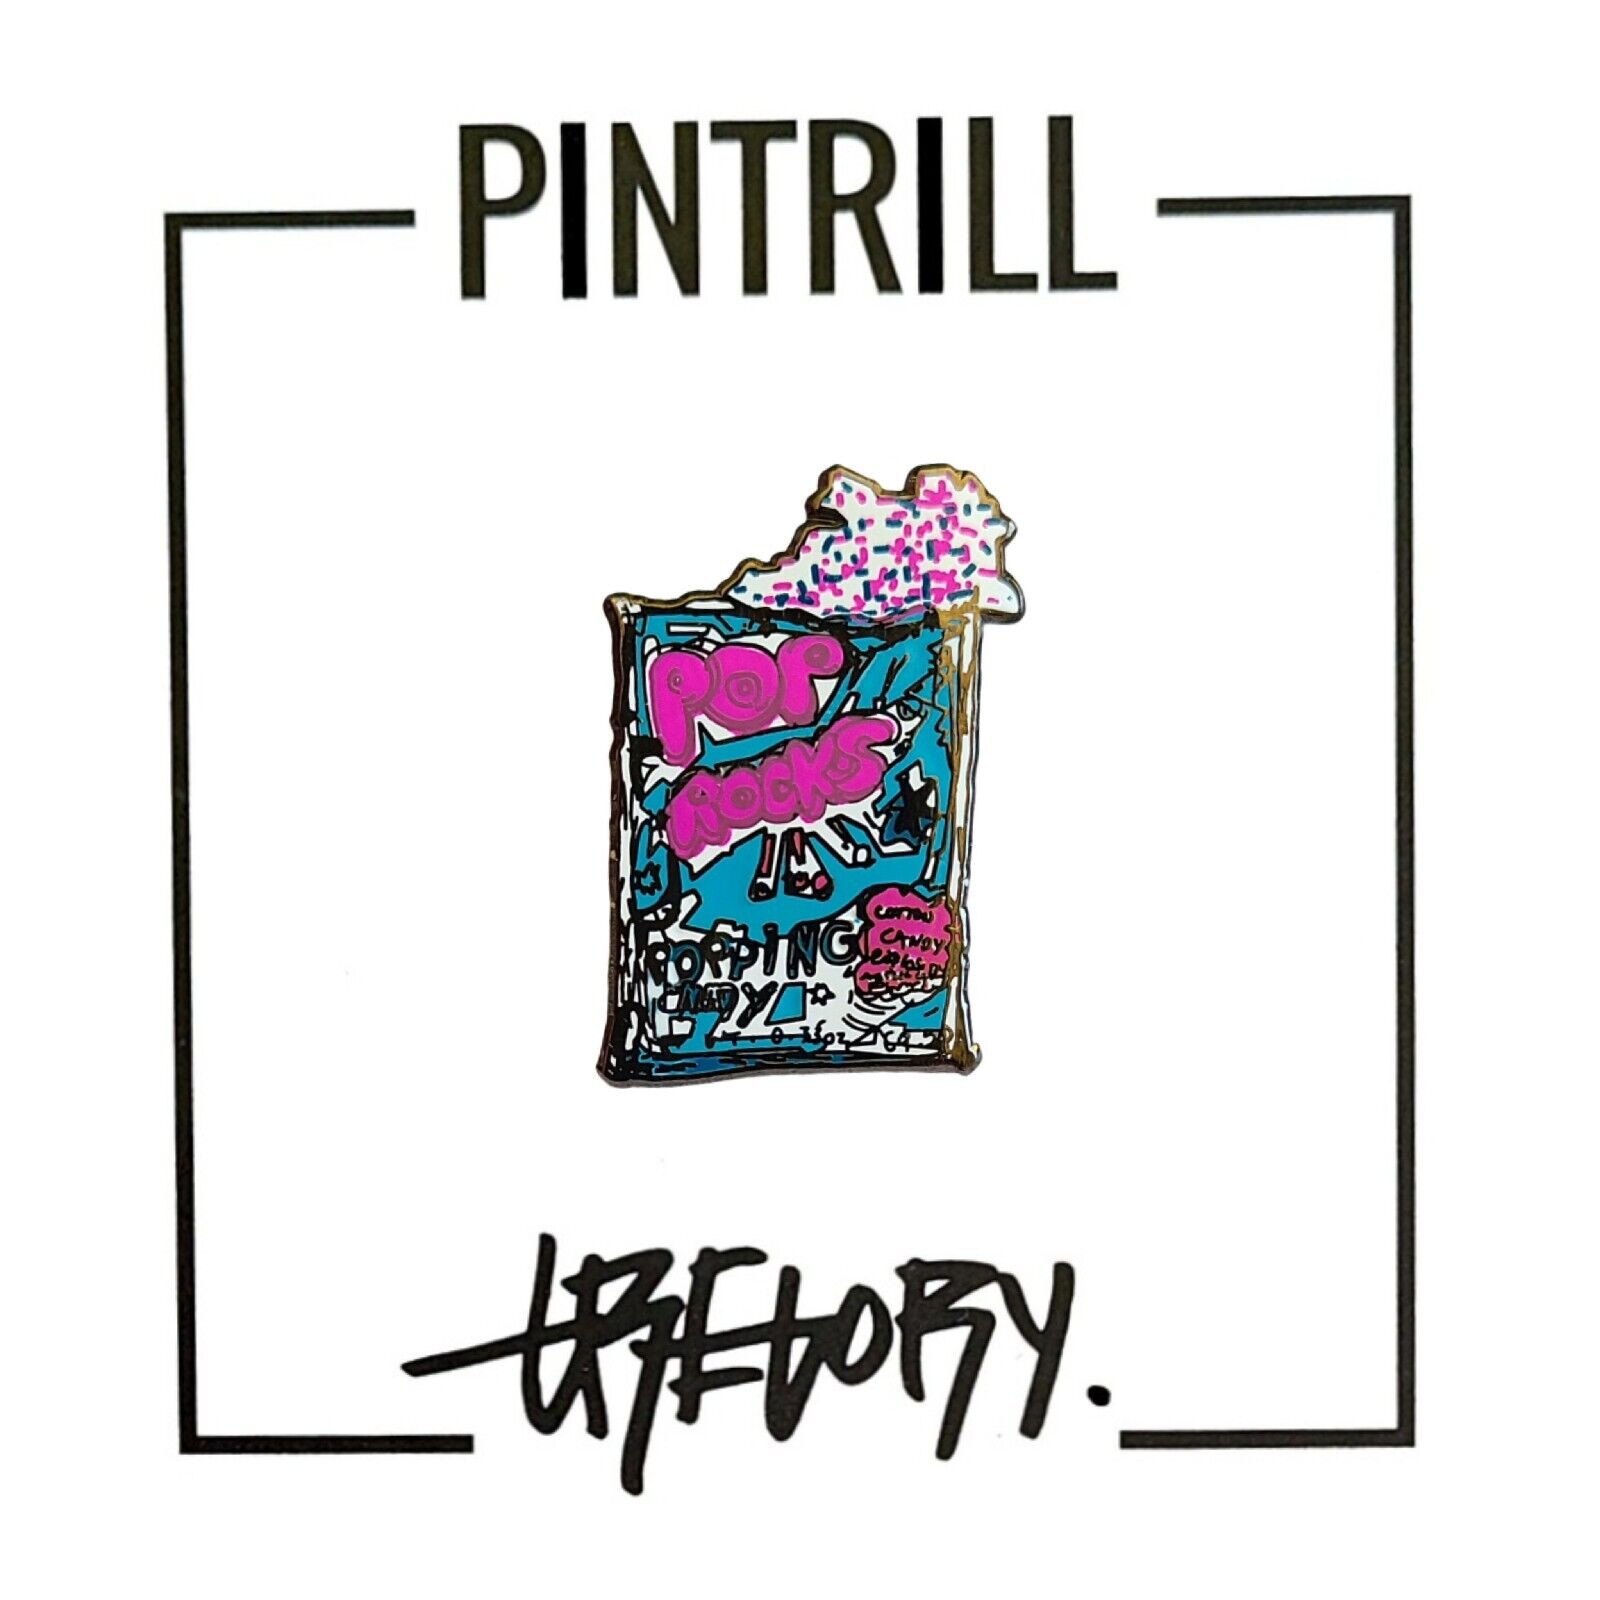 ⚡️RARE⚡️ PINTRILL x GREGORY SIFF Pop Rocks Pin *BRAND NEW* 2017 LIMITED ED.  🍭